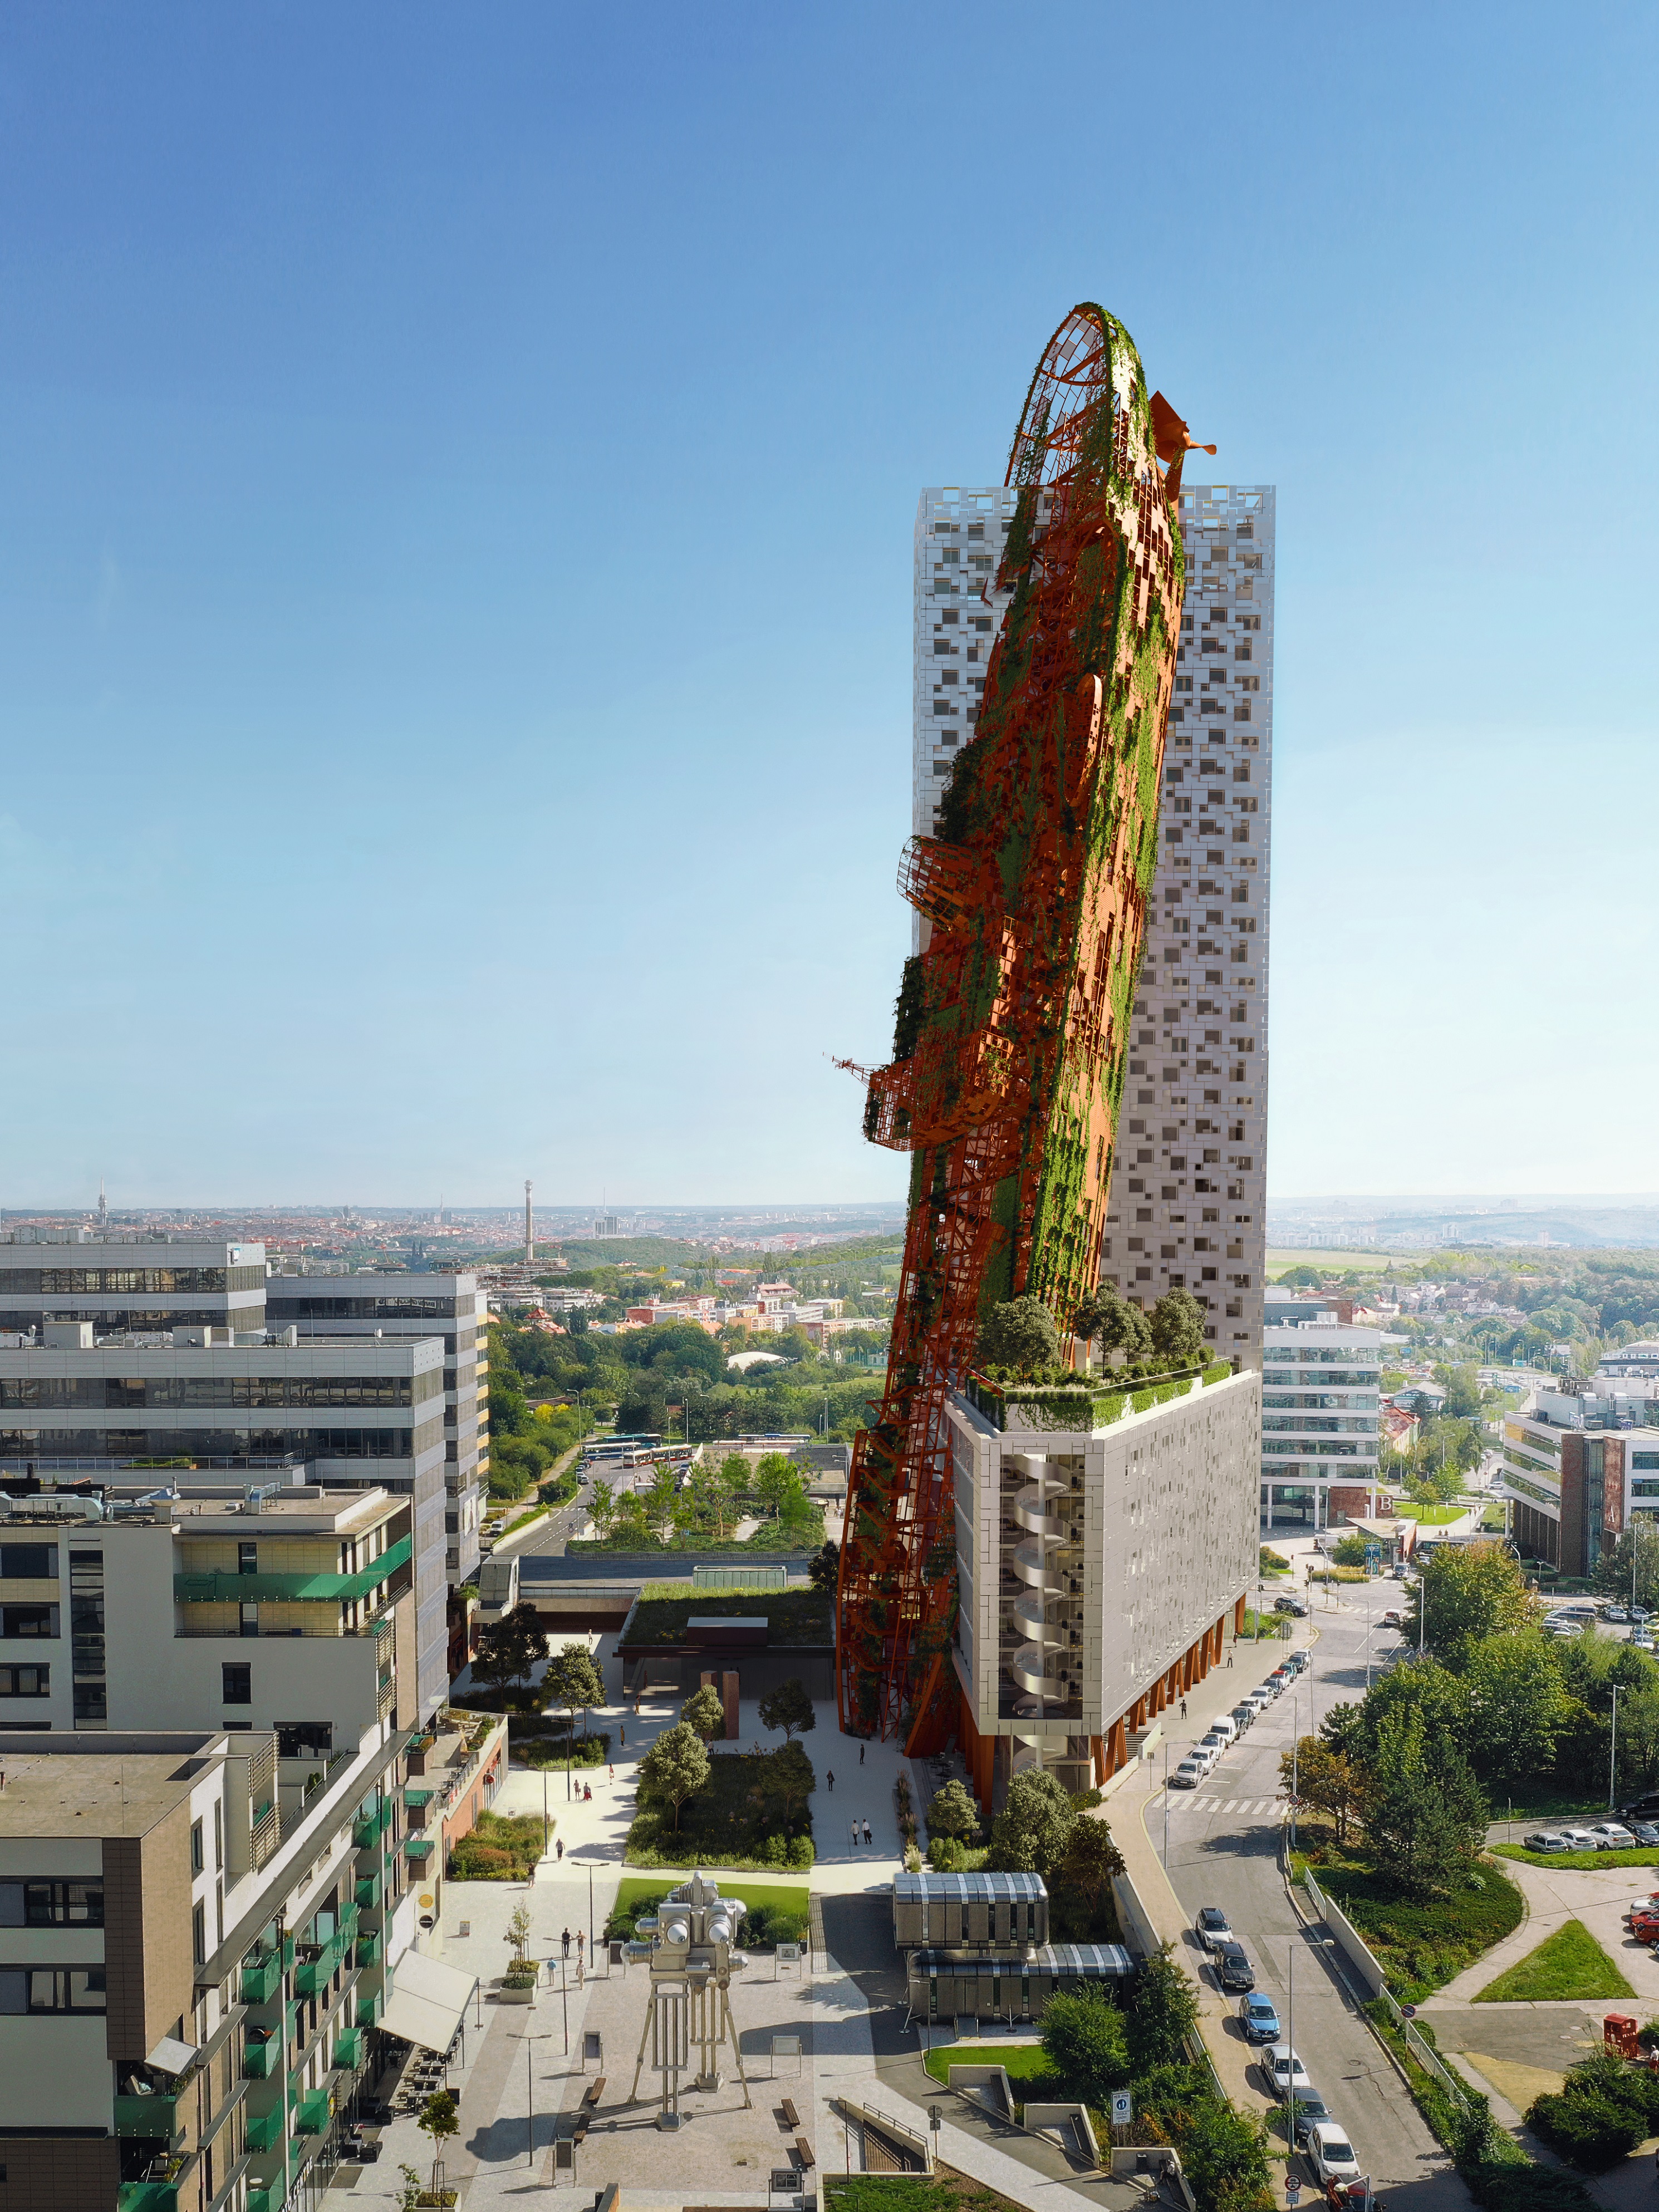 And finally... Shipwreck warning of climate change set to become Czech Republic's tallest building